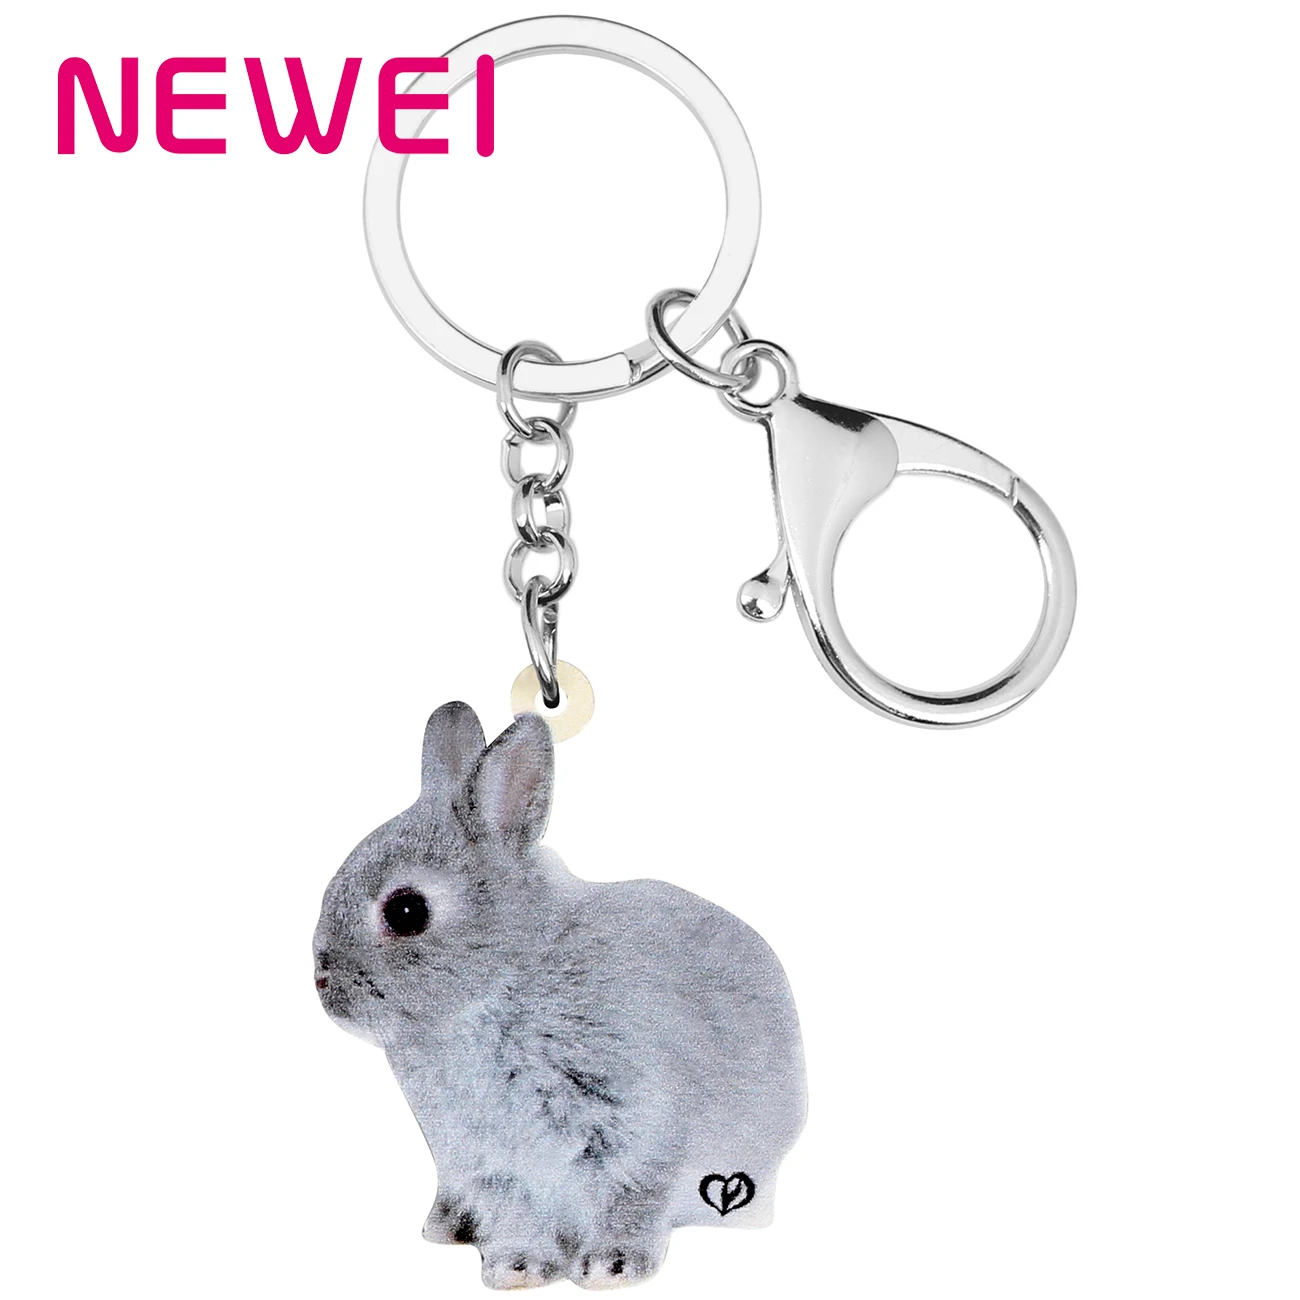 

Newei Acrylic Gray Easter Hare Rabbit Bunny Keychains Animal Keyring Jewelry For Women Girl Teen Fashion Gift Bag Car Decoration